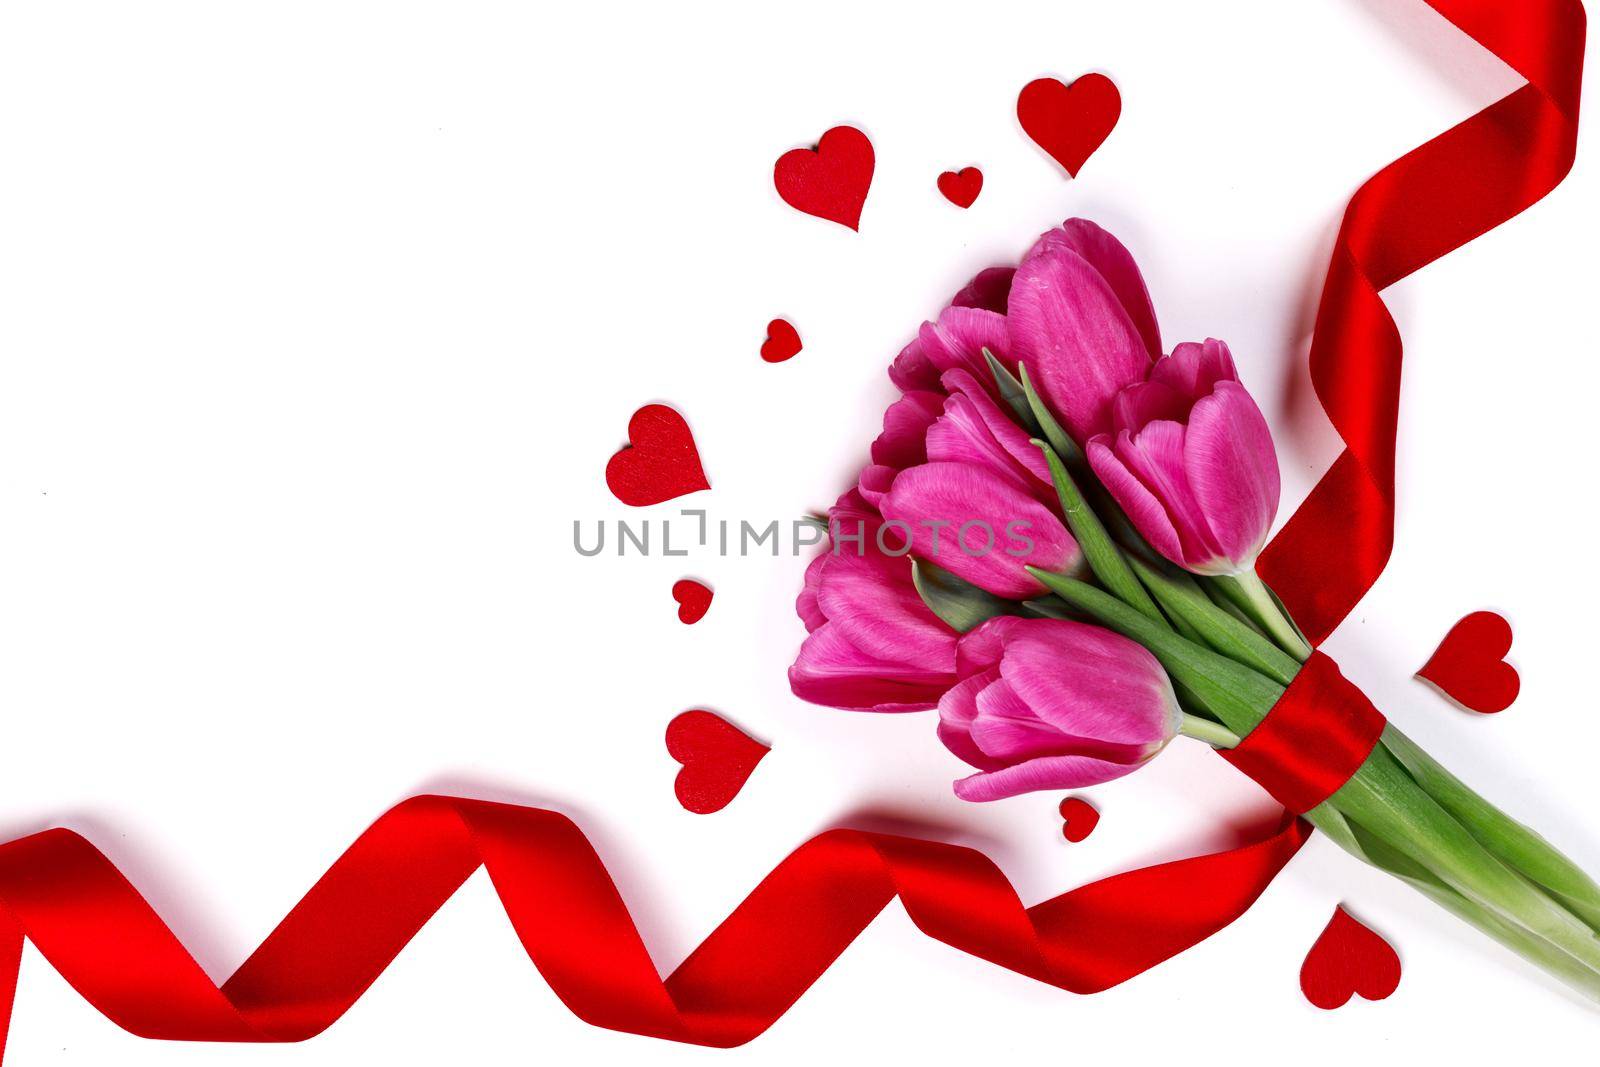 Valentines day hearts and pink tulip flowers isolated on white background